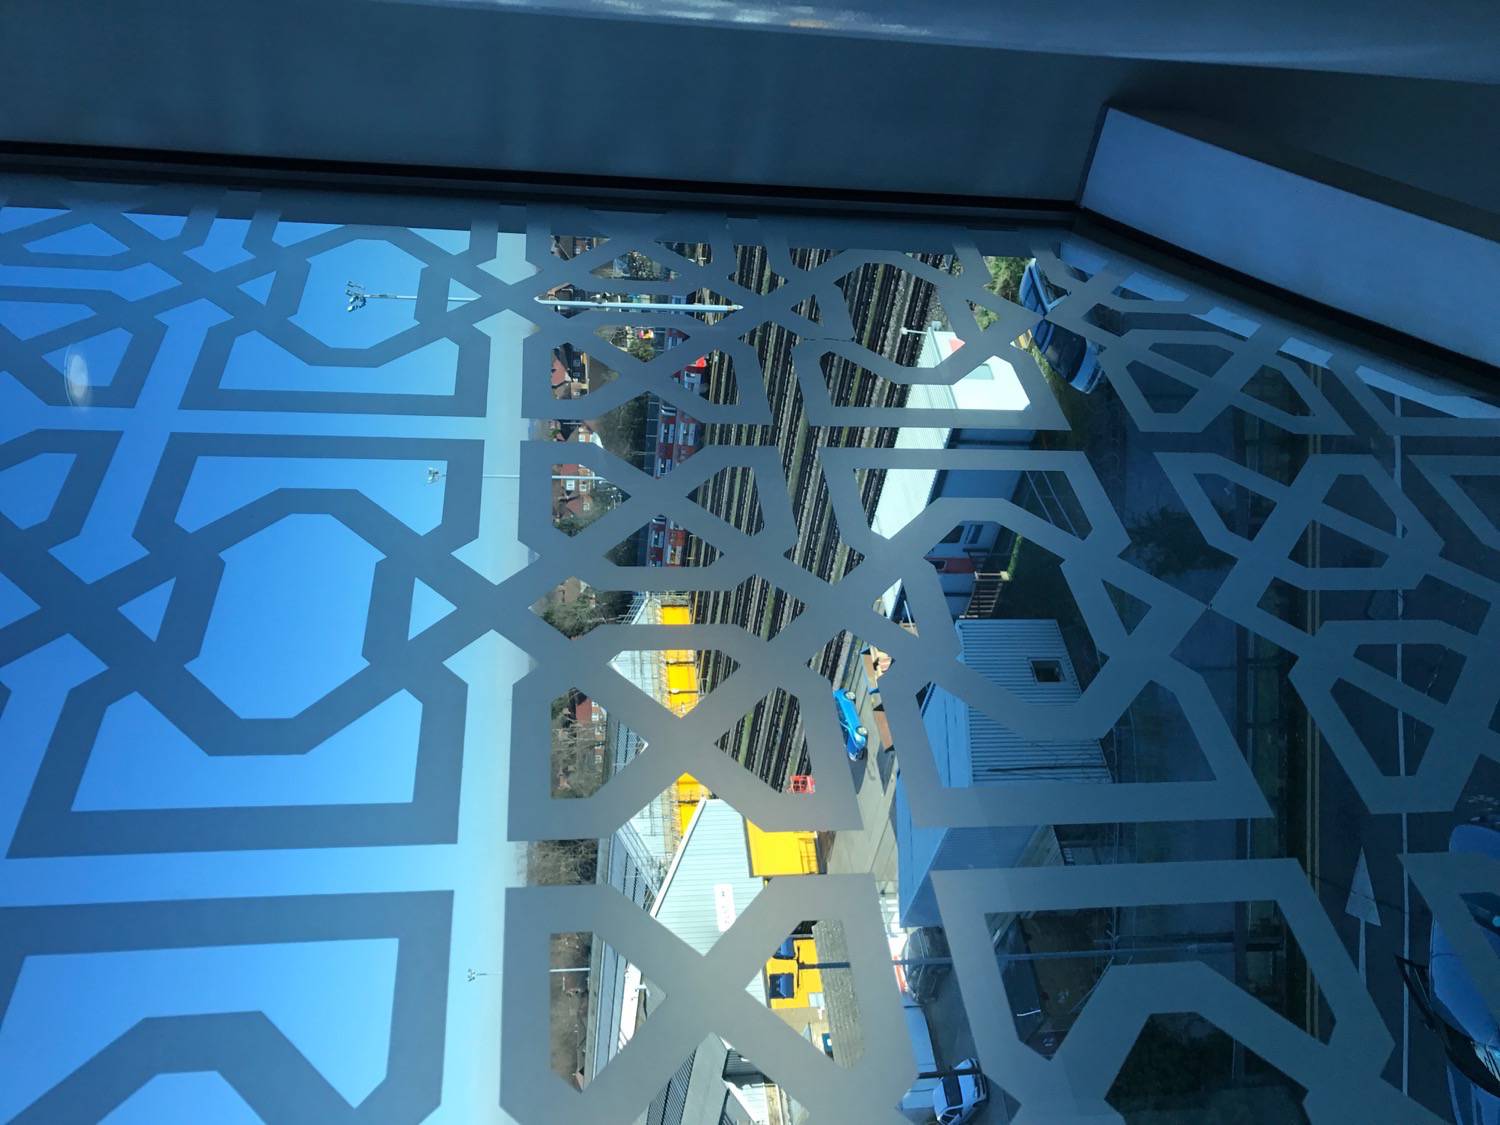 View through a window decorated with geomatric patterns to the neighboring railyard